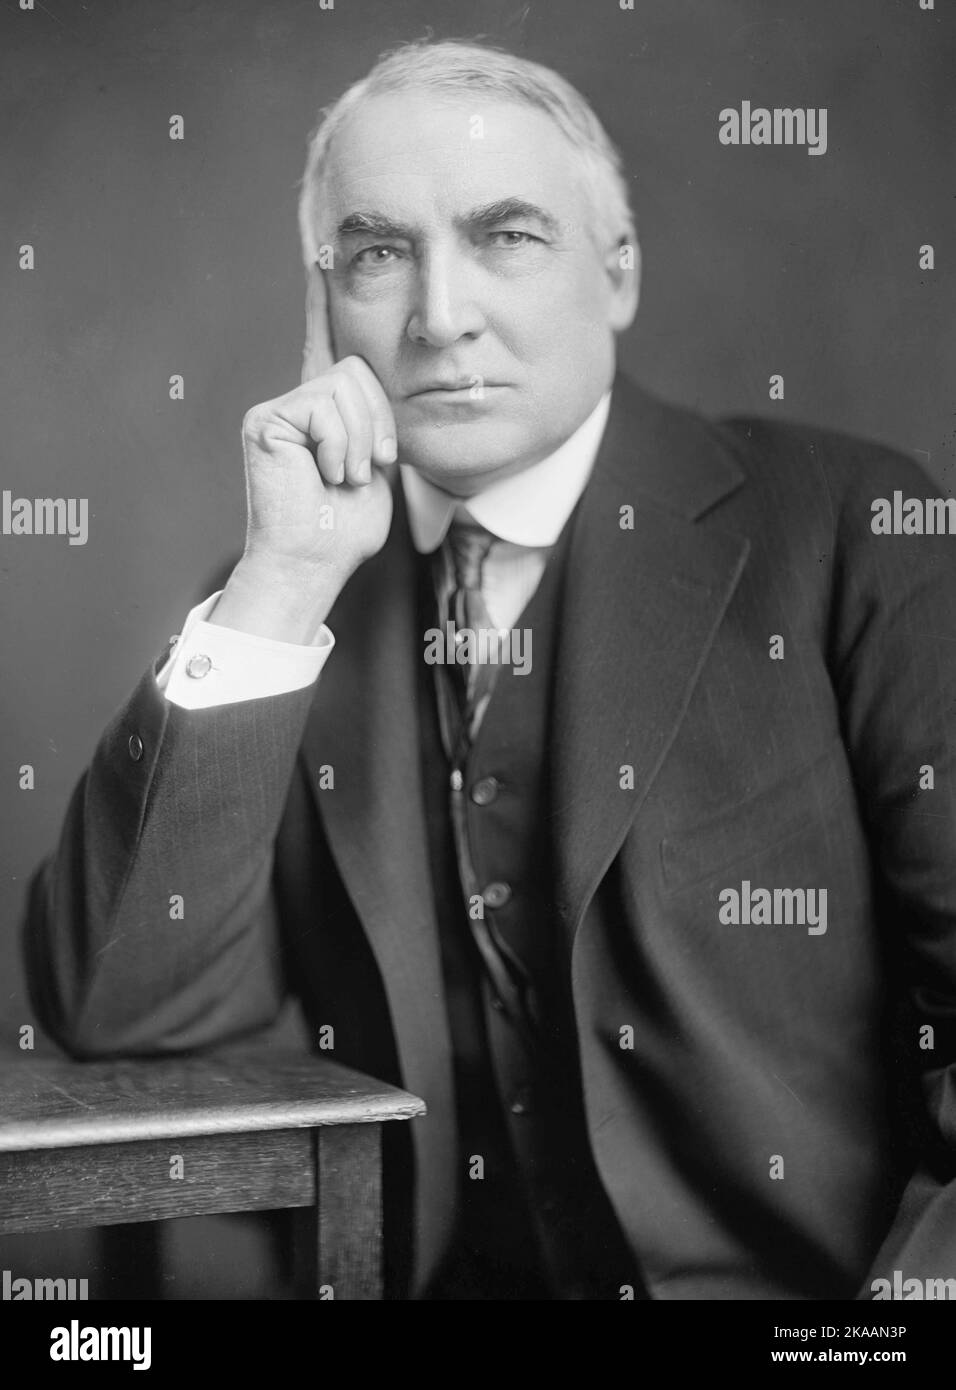 Warren G. Harding, by Harris & Ewing. Warren Gamaliel Harding (November 2, 1865 – August 2, 1923) was the 29th president of the United States, serving from 1921 until his death in 1923. Stock Photo